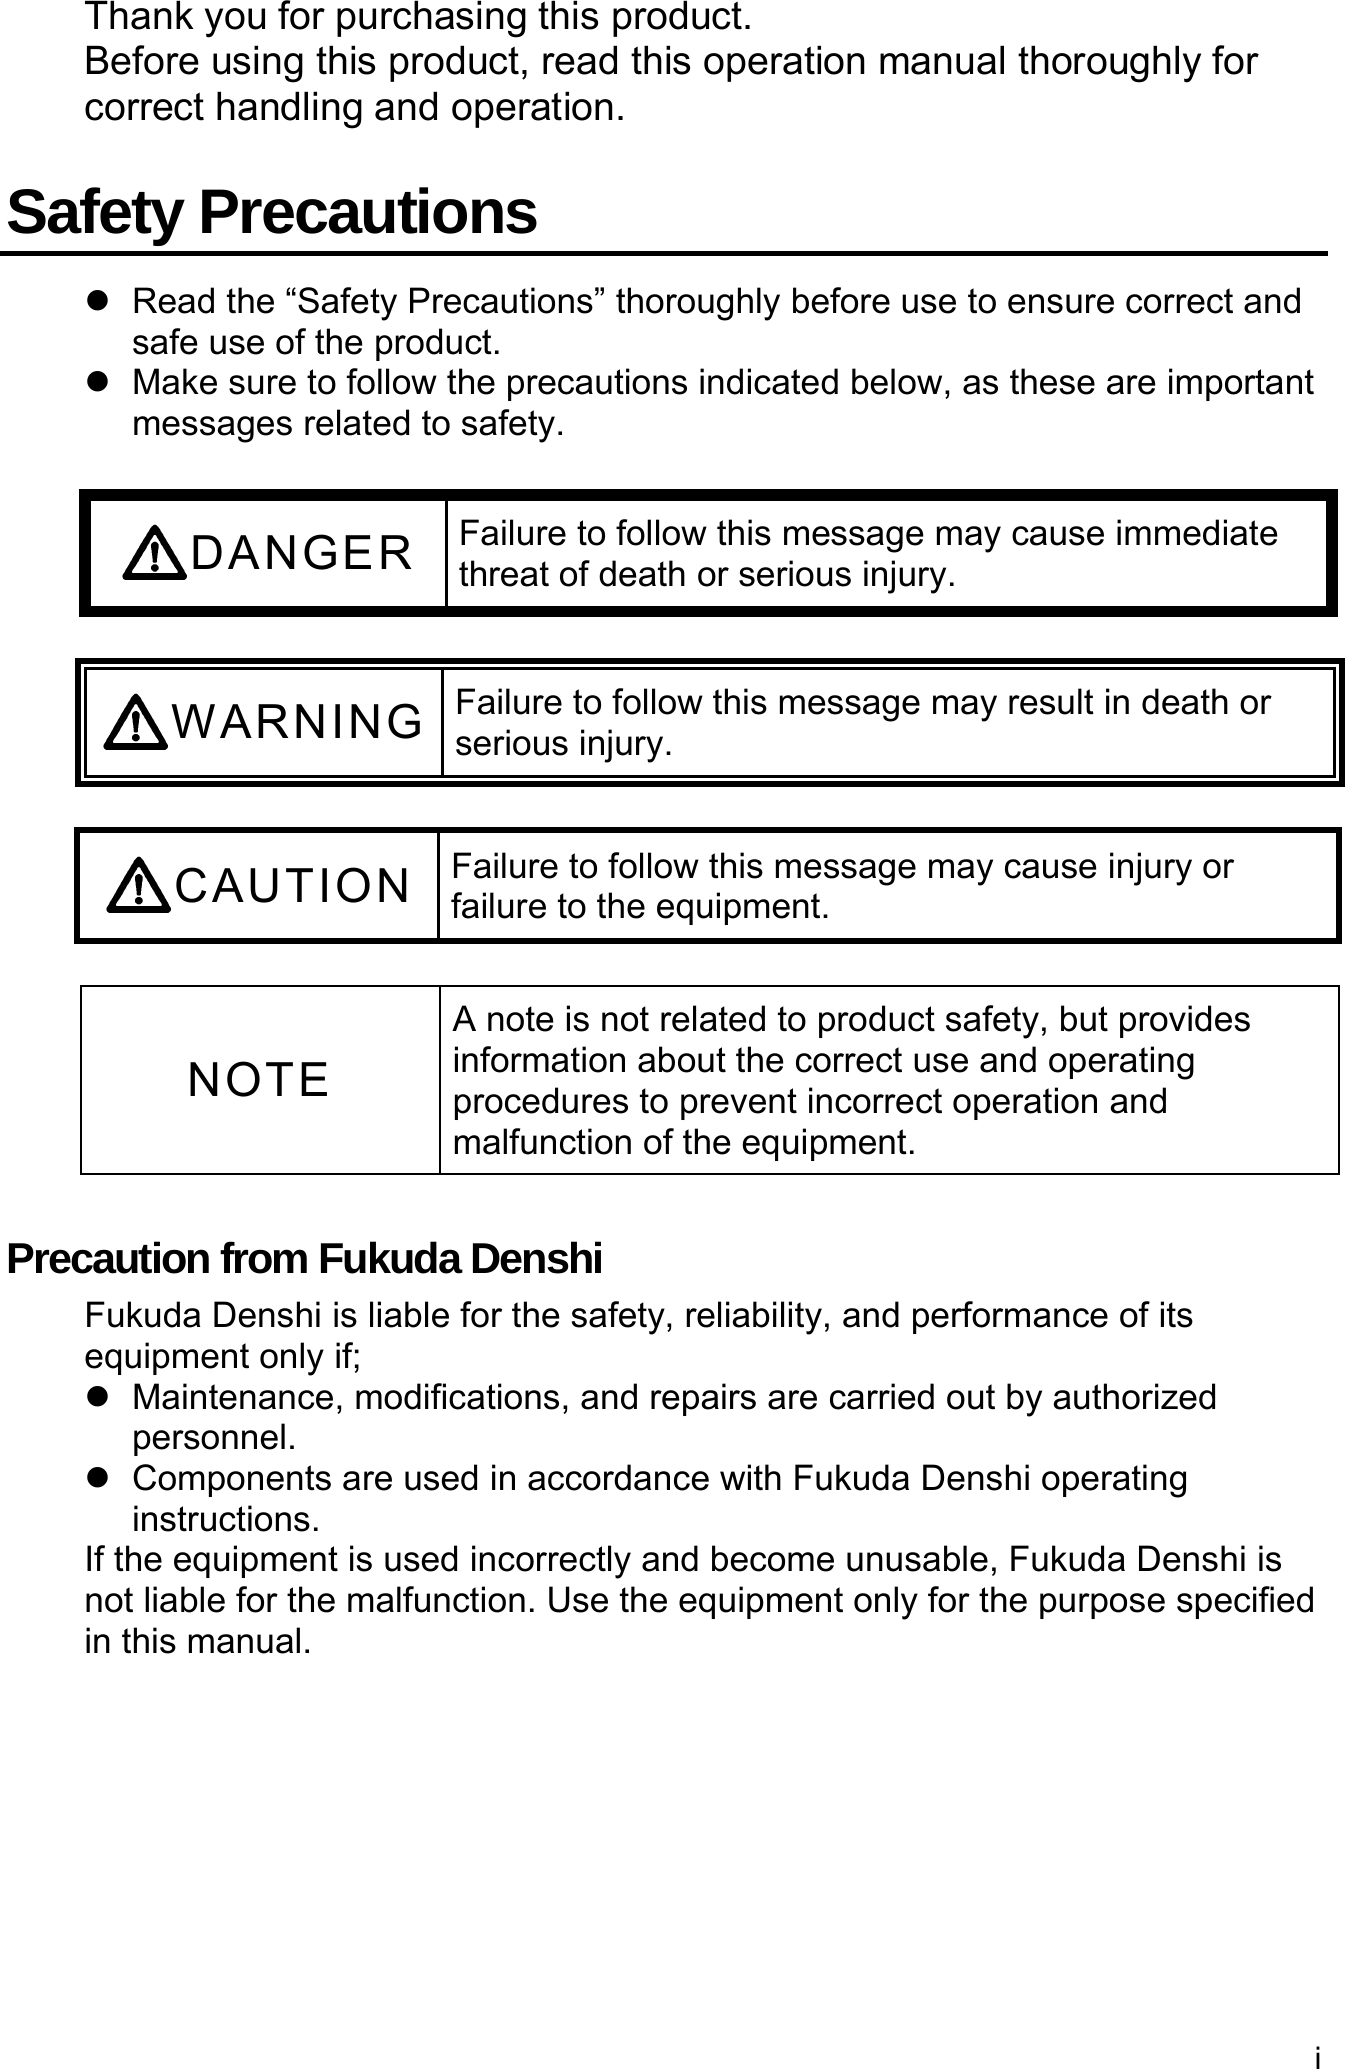 i  Thank you for purchasing this product. Before using this product, read this operation manual thoroughly for correct handling and operation.  Safety Precautions   Read the “Safety Precautions” thoroughly before use to ensure correct and safe use of the product.   Make sure to follow the precautions indicated below, as these are important messages related to safety.  DANGER Failure to follow this message may cause immediate threat of death or serious injury.  WARNING Failure to follow this message may result in death or serious injury.  CAUTION Failure to follow this message may cause injury or failure to the equipment.  NOTE A note is not related to product safety, but provides information about the correct use and operating procedures to prevent incorrect operation and malfunction of the equipment.  Precaution from Fukuda Denshi Fukuda Denshi is liable for the safety, reliability, and performance of its equipment only if;  Maintenance, modifications, and repairs are carried out by authorized personnel.   Components are used in accordance with Fukuda Denshi operating instructions. If the equipment is used incorrectly and become unusable, Fukuda Denshi is not liable for the malfunction. Use the equipment only for the purpose specified in this manual. 